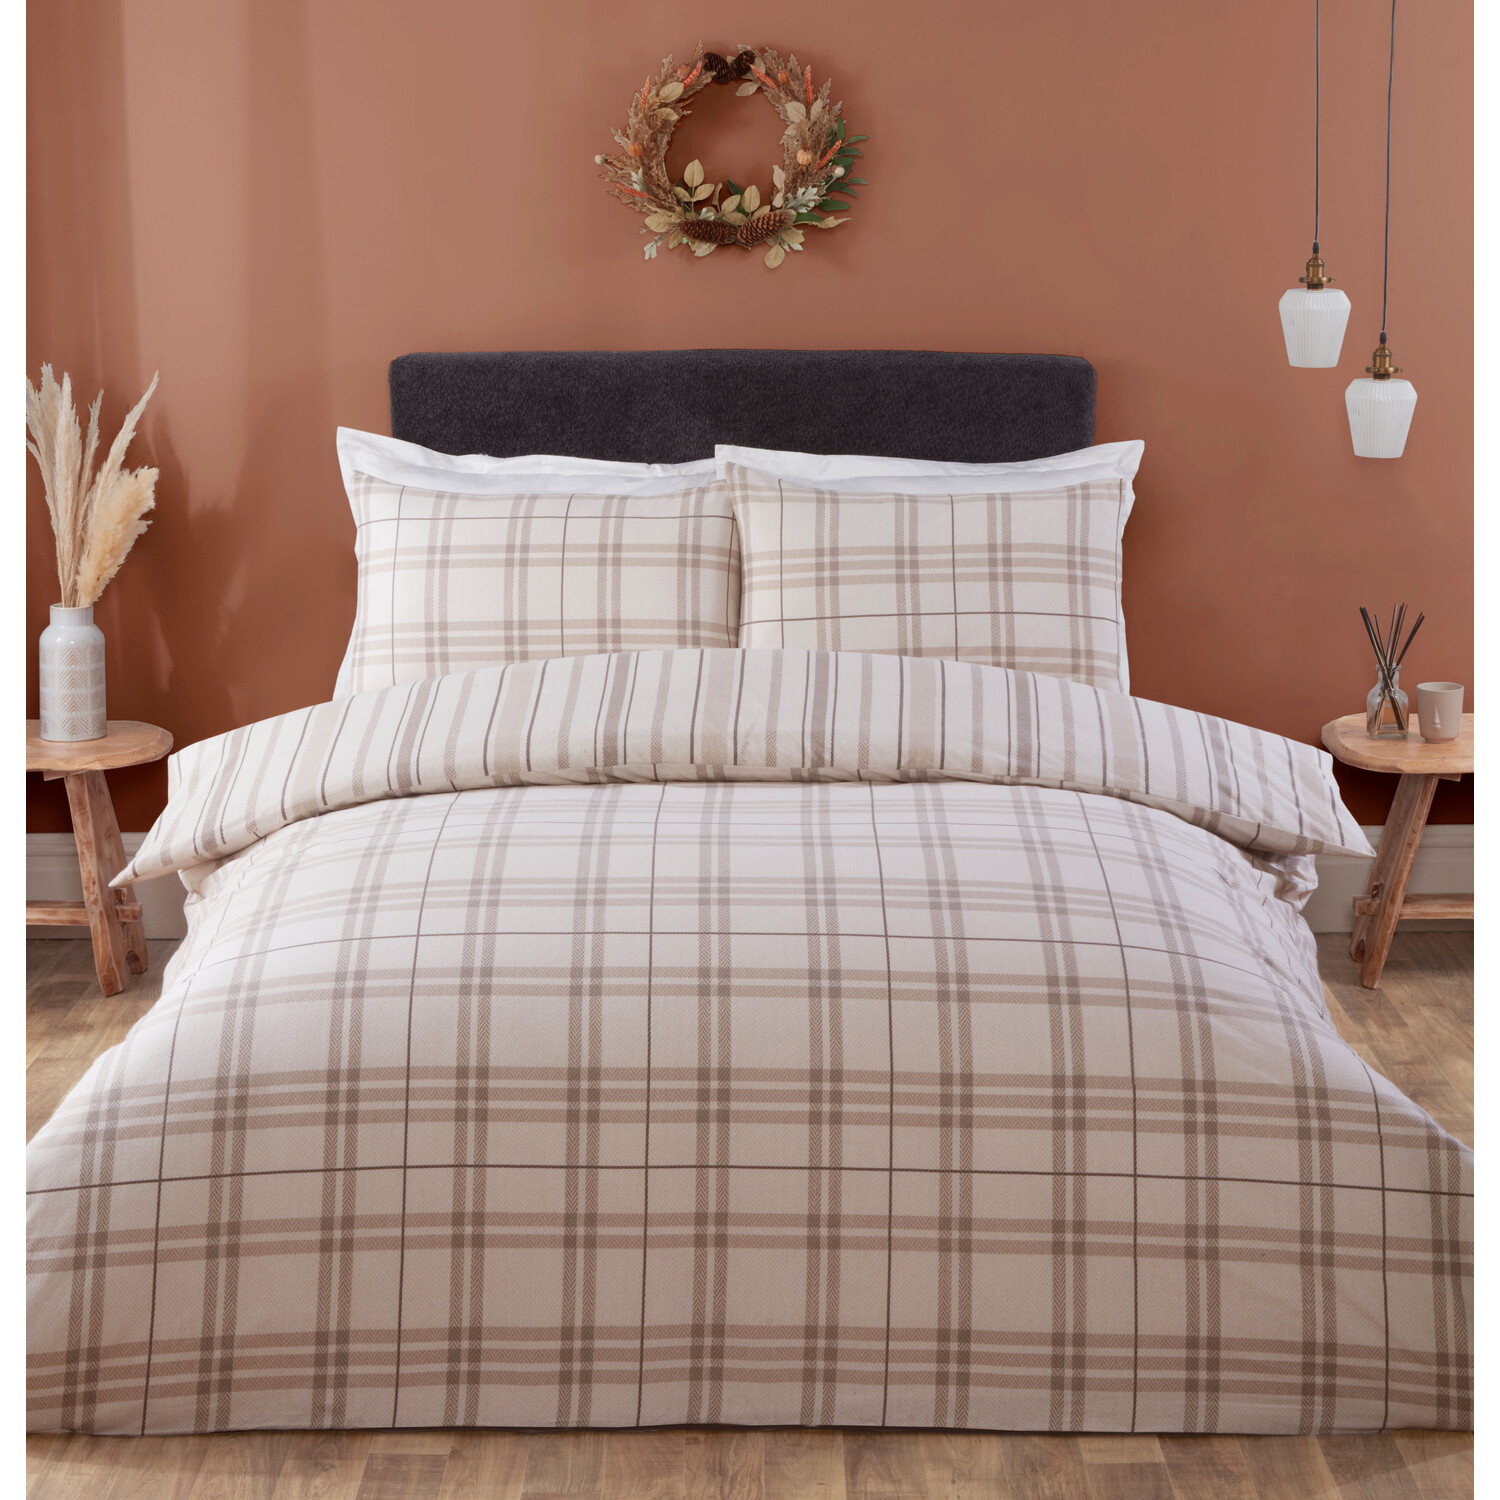 Fall Autumn Single Brown Check Duvet Cover and Pillowcase Set Image 1